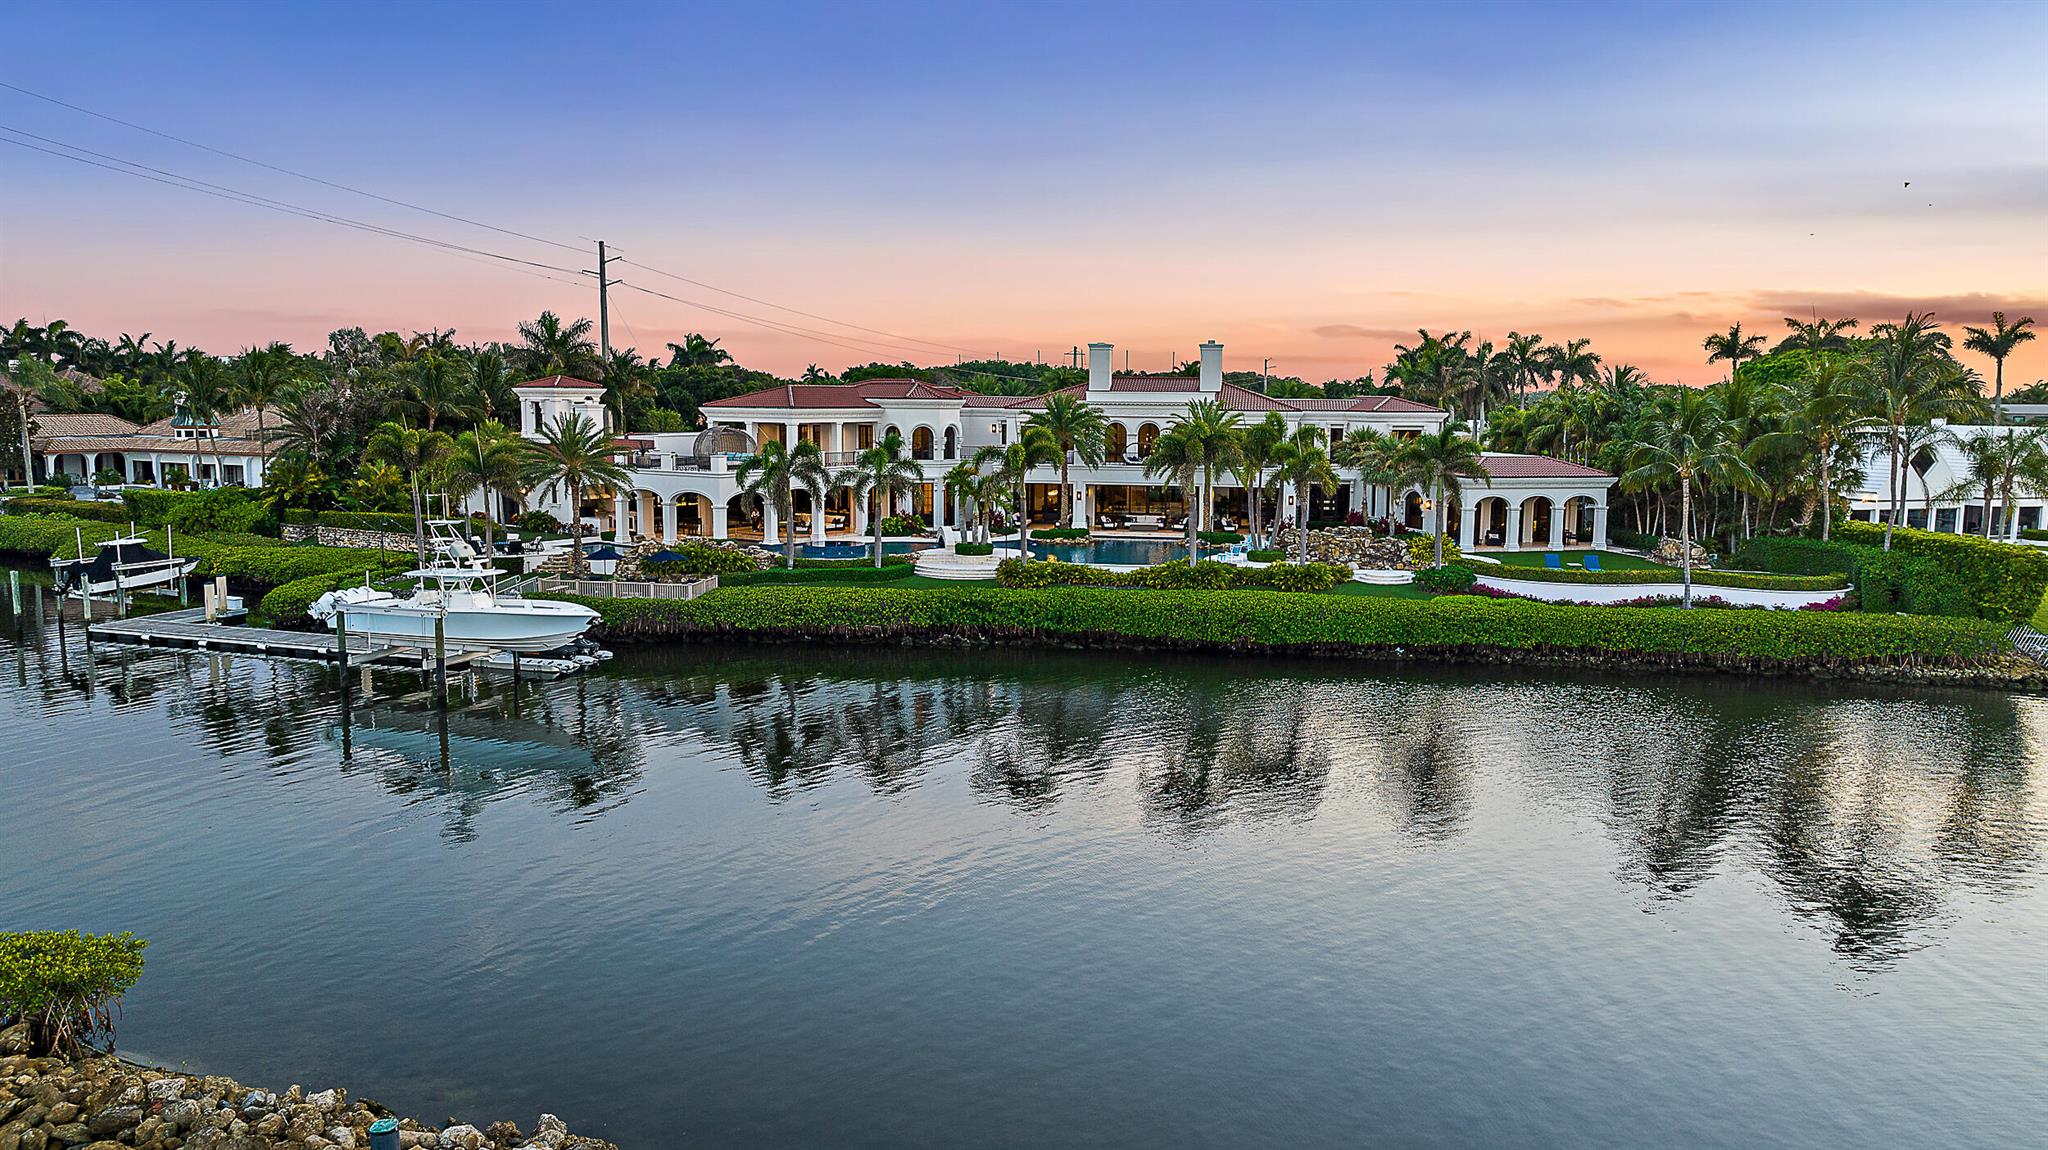 Ultimate Trophy Property in Admirals Cove. Nestled within the exclusive Admirals Cove community, the home originally completed in 2016 has just undergone a $12 million+ total remodel and addition, completed in 2023. This magnificent trophy property offers unparalleled luxury and coastal living. This amazing estate can never be built again in Jupiter due to its size. Priced $5 million below 2024 appraised value and $35 million below replacement cost, which today would be in excess of $85 million.  This offering provides a truly unique opportunity that literally can't be recreated today at any cost. This property spans nearly 1.5 acres of prime, protected waterfront with over 365 feet of Intracoastal waterfrontage and can accommodate a Mega Yacht, with views of the Waterway and beyond. The expansive pool, which cost in excess of $1.5 million, invites relaxation, complete with two hot tubs for ultimate indulgence, a pedestrian bridge that crosses the pool with cascading waterfalls, fire bowls, swim up bar, two summer kitchens, and drop-down TV all with unparalleled 180 degree views of the Intracoastal and across to a park and beautiful white sandy beach preserve that will not be built on. The multiple loggia seating areas provide shade and comfort all year long. Toy lover? This property has a showroom garage that will hold a 45' motorcoach and 18 plus cars with marble flooring, air compressor system, three double car lifts, several storage and work spaces, restroom and laundry room, perfect for the car enthusiast. Primary palatial suite with expansive views of the resort style pool and waterways. Offering separate his and her bathrooms and closets, the sleek and clean her bath, complete with water room with large infinity edge soaker bathtub with underwater LED lighting, large steam shower, hair salon with wash station that opens up to a boutique style closet with hidden washer and dryer.  Masculine his bath and closet has a custom glass tile and marble shower, opening to a closet fit for a king overlooking fountains and waterfalls that flow into the pool as well as a hidden washer and dryer. 5 large secondary guest suites having private baths, balconies and sweeping Intracoastal views. Entertainment areas galore with custom bar, sports lounge room with 5 TVs for the ultimate game day experience, arcade and game room with golf simulator, multiple TV's, shuffleboard and a home theater, that cost over $1 million, was designed for the ultimate movie night.  The quality level and craftsmanship of this home is just unimaginable, and it is Kemper Certified. This property has it all!! Buyers need to be verified for showings.